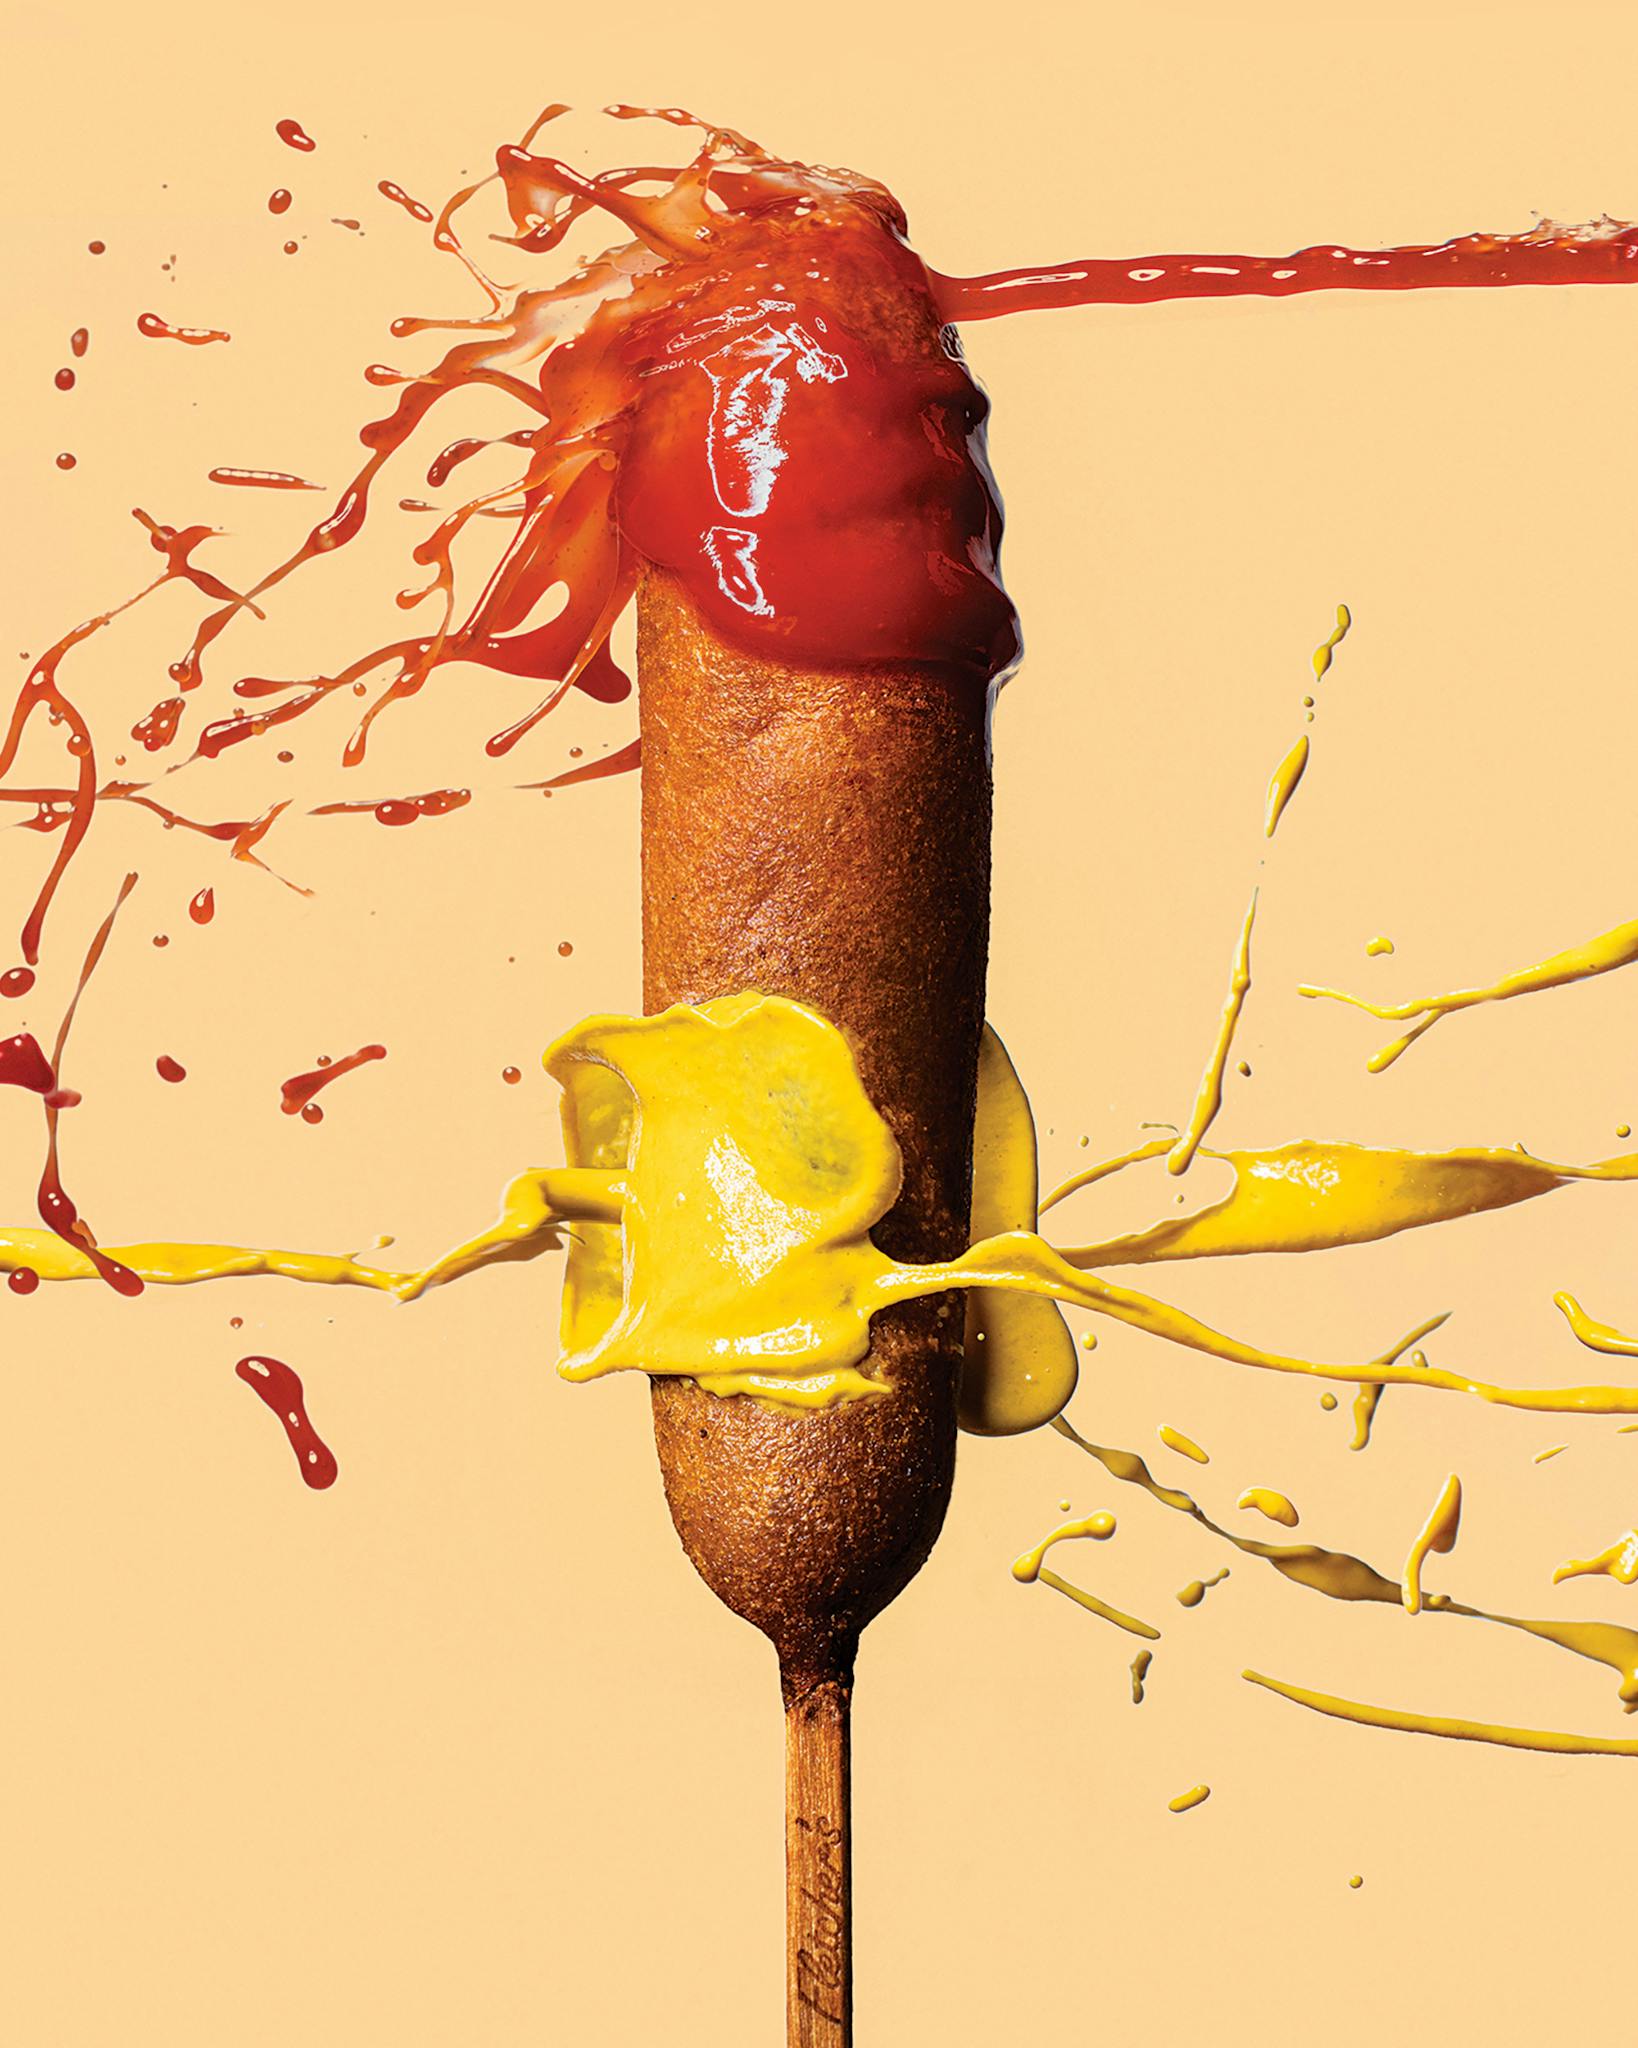 Ketchup and mustard are aggressively squirted on a corny dog from opposing sides.